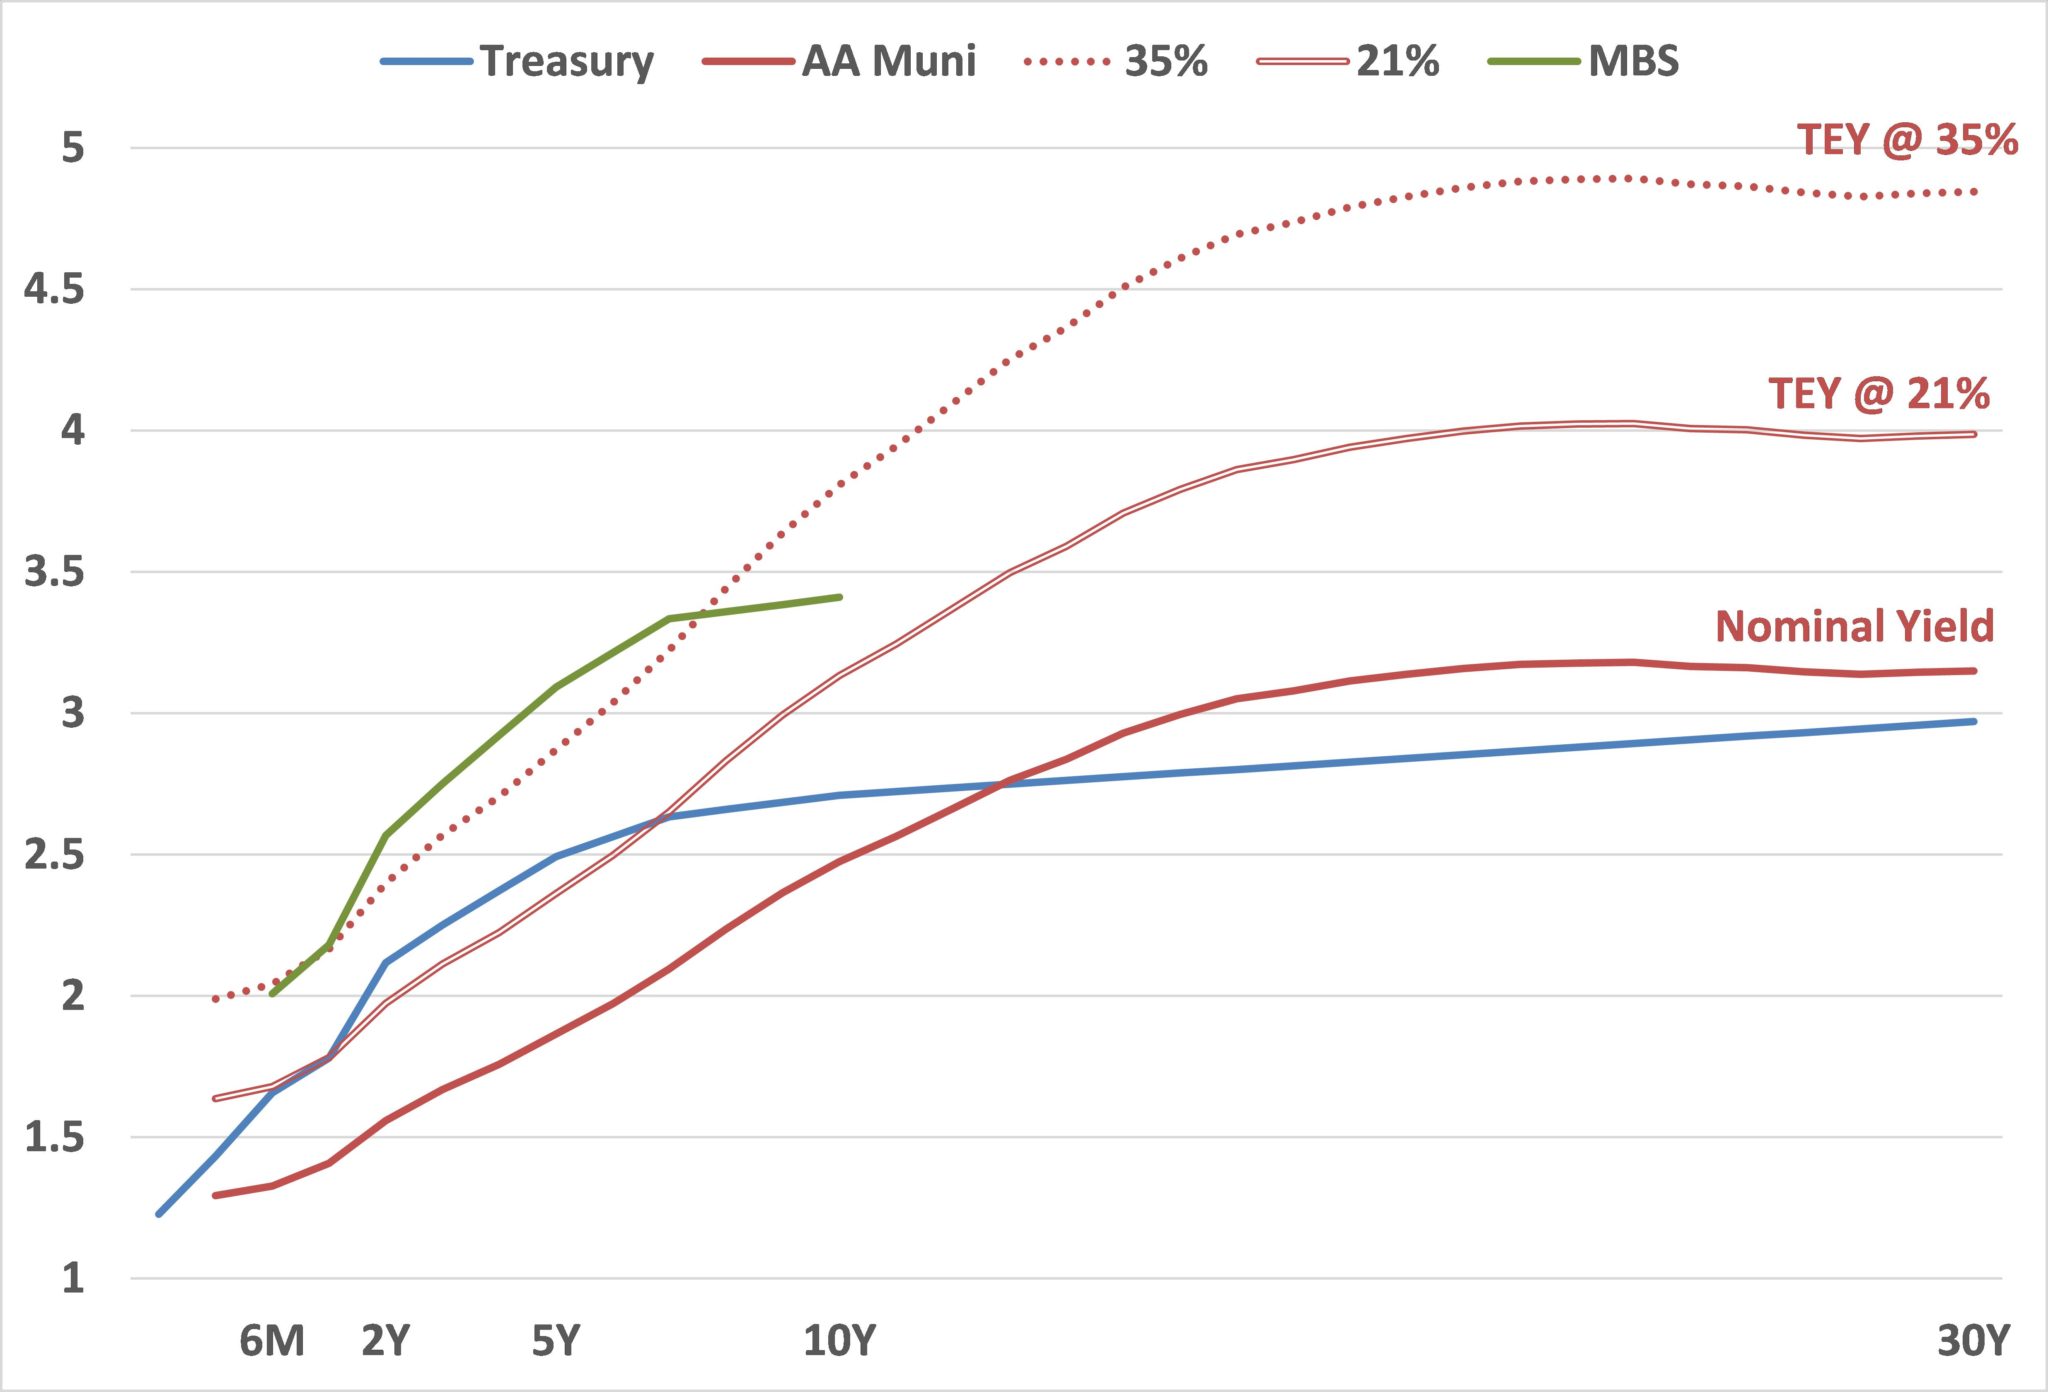 Tax Equivalent Yield Chart 2018